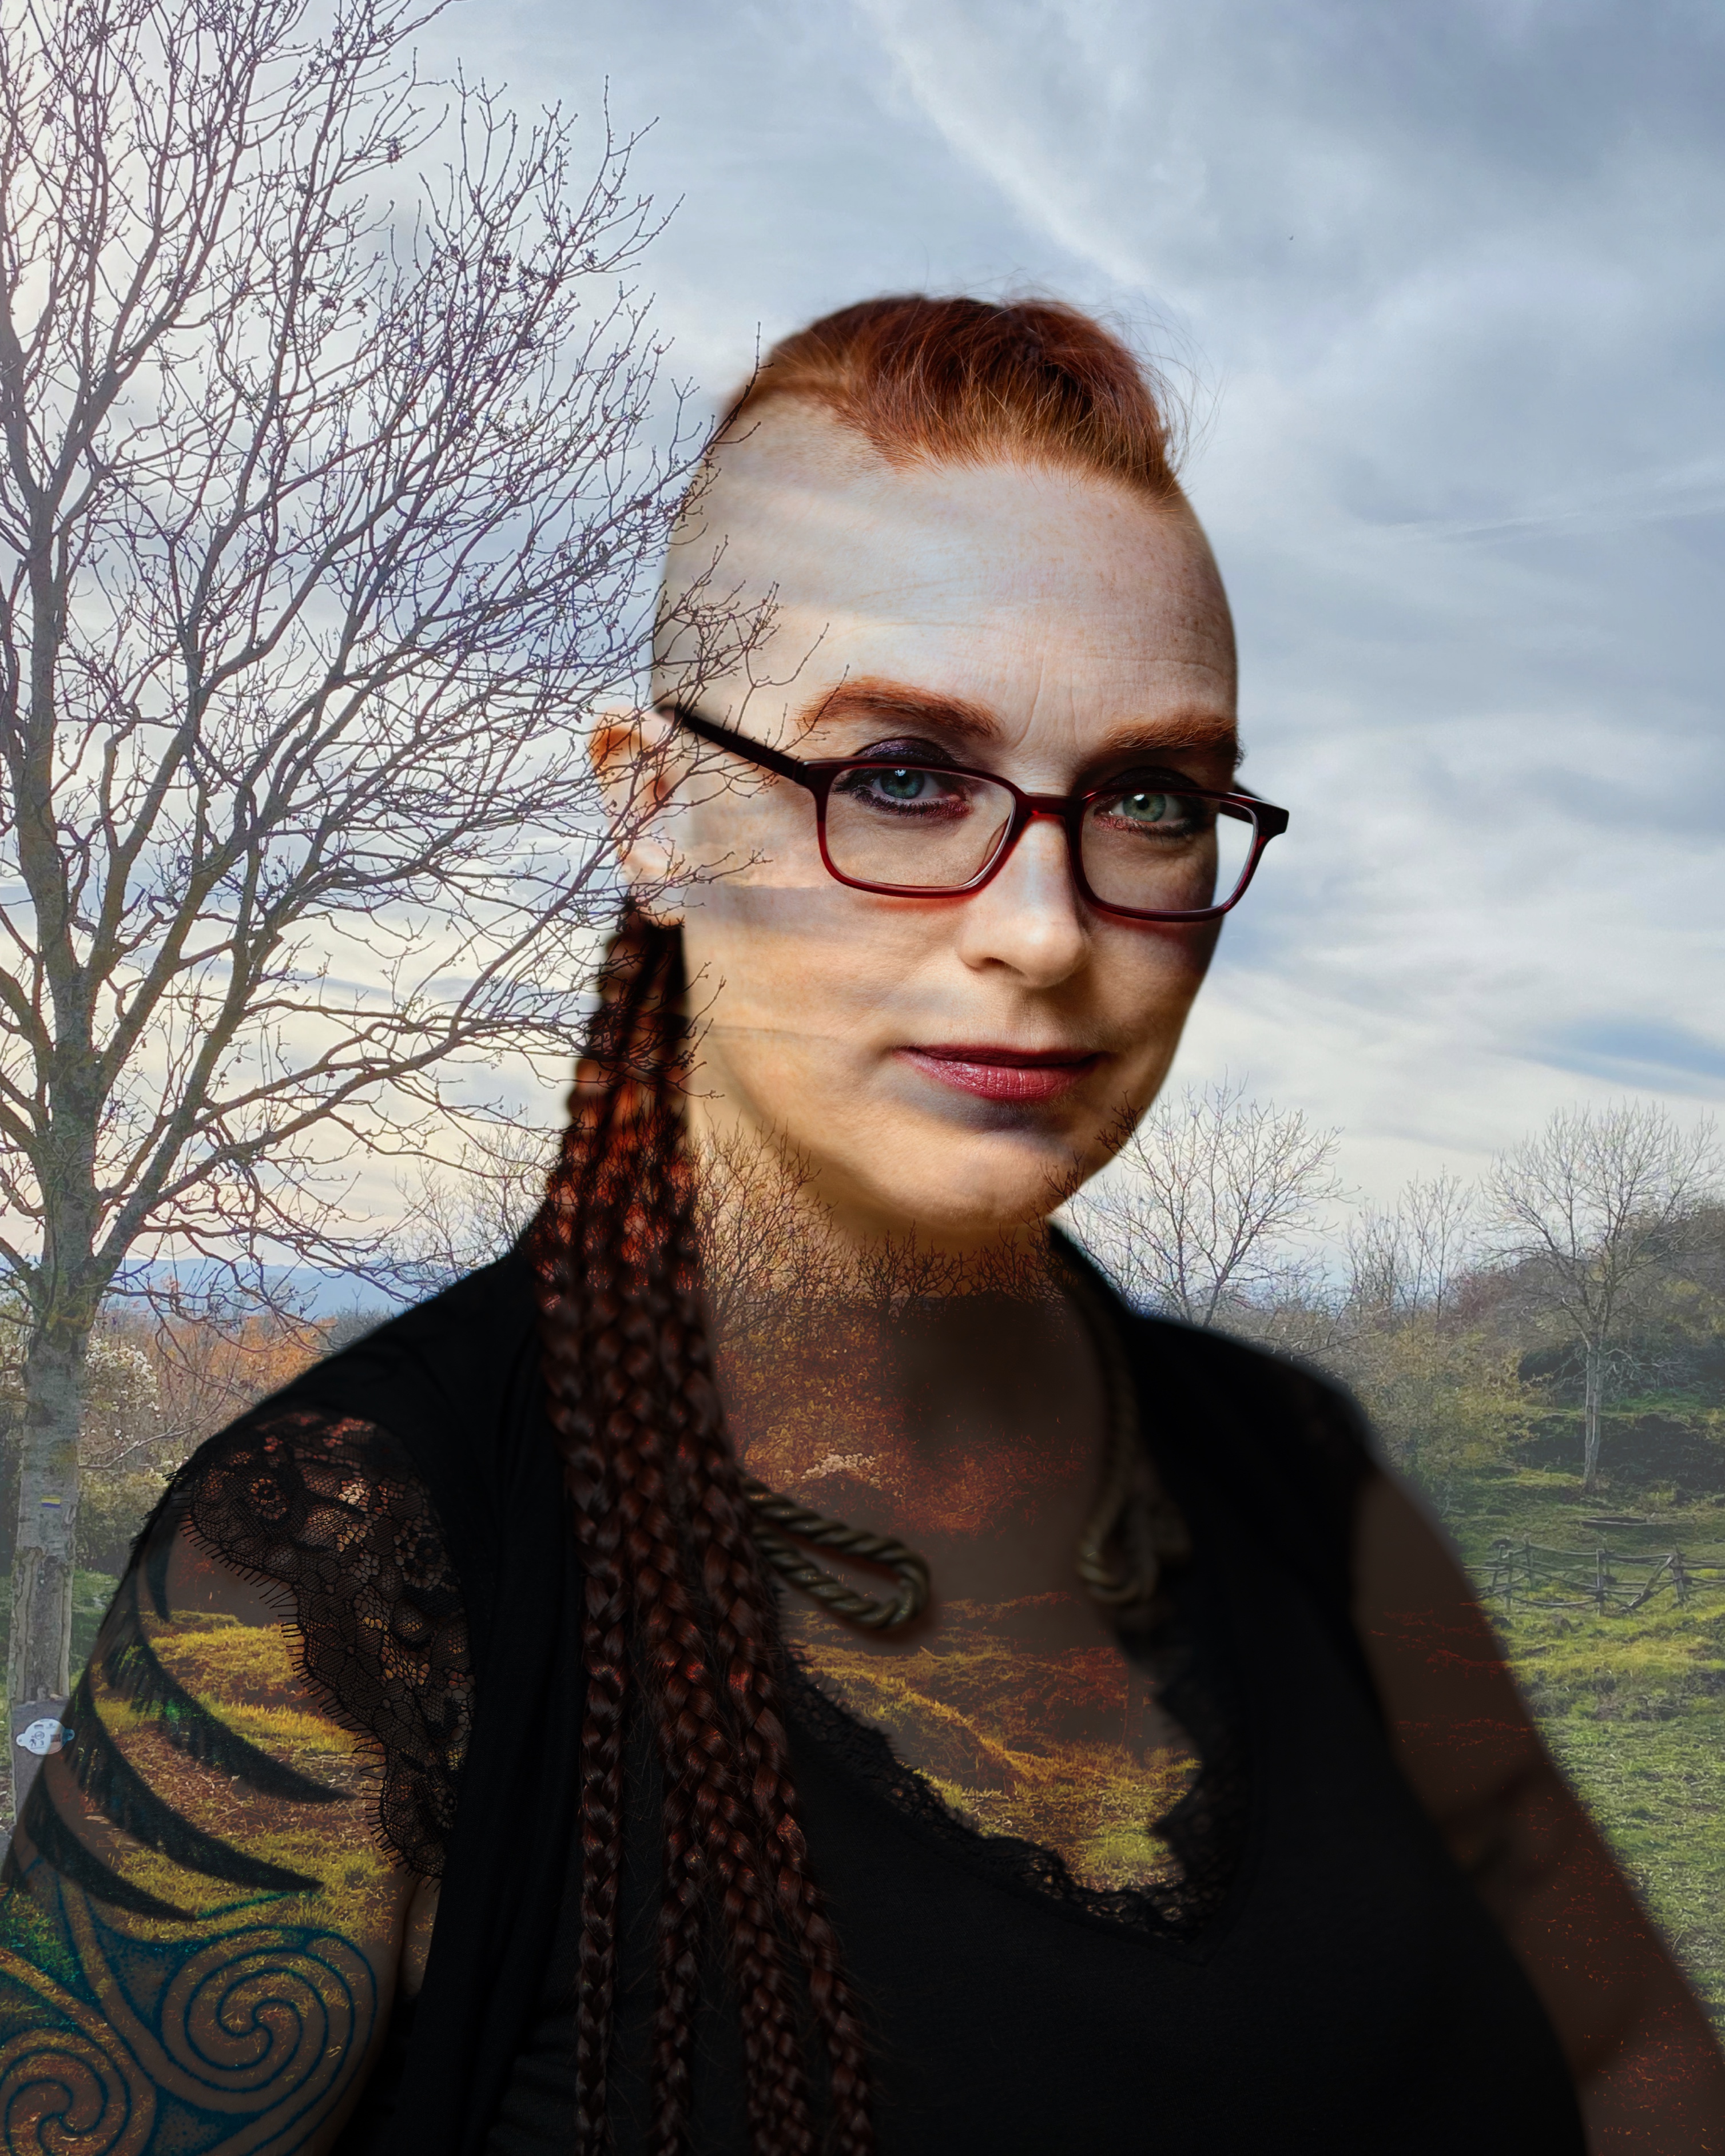 Femme presenting person with glasses, light skin, red hair shaved on the sides and braided, with an overlay showing a mountain landscape